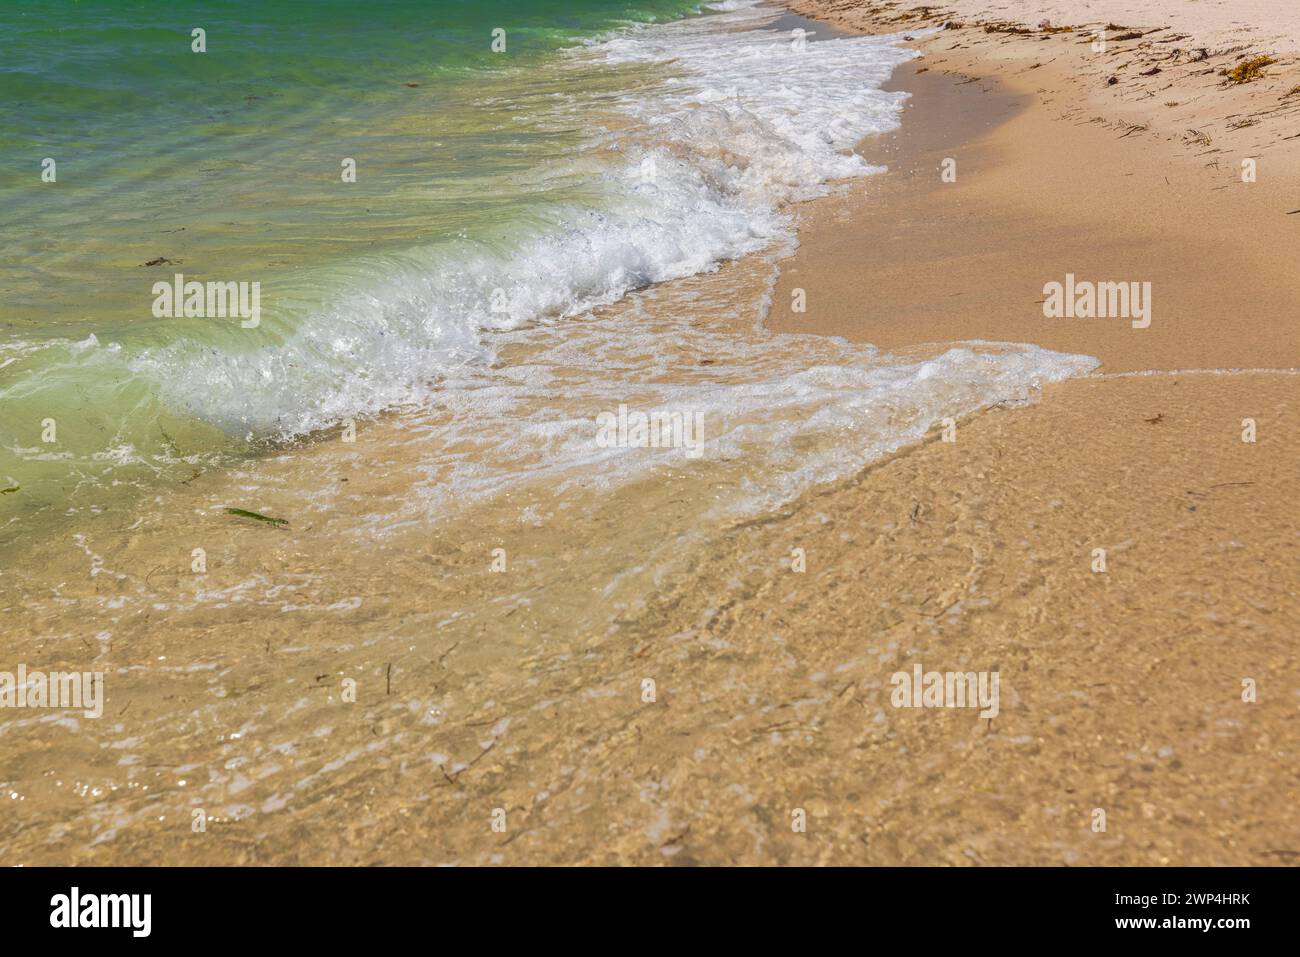 Scenic sight of a sandy beach, with the waves of the Atlantic Ocean gently lapping against the shore. Miami Beach. Stock Photo